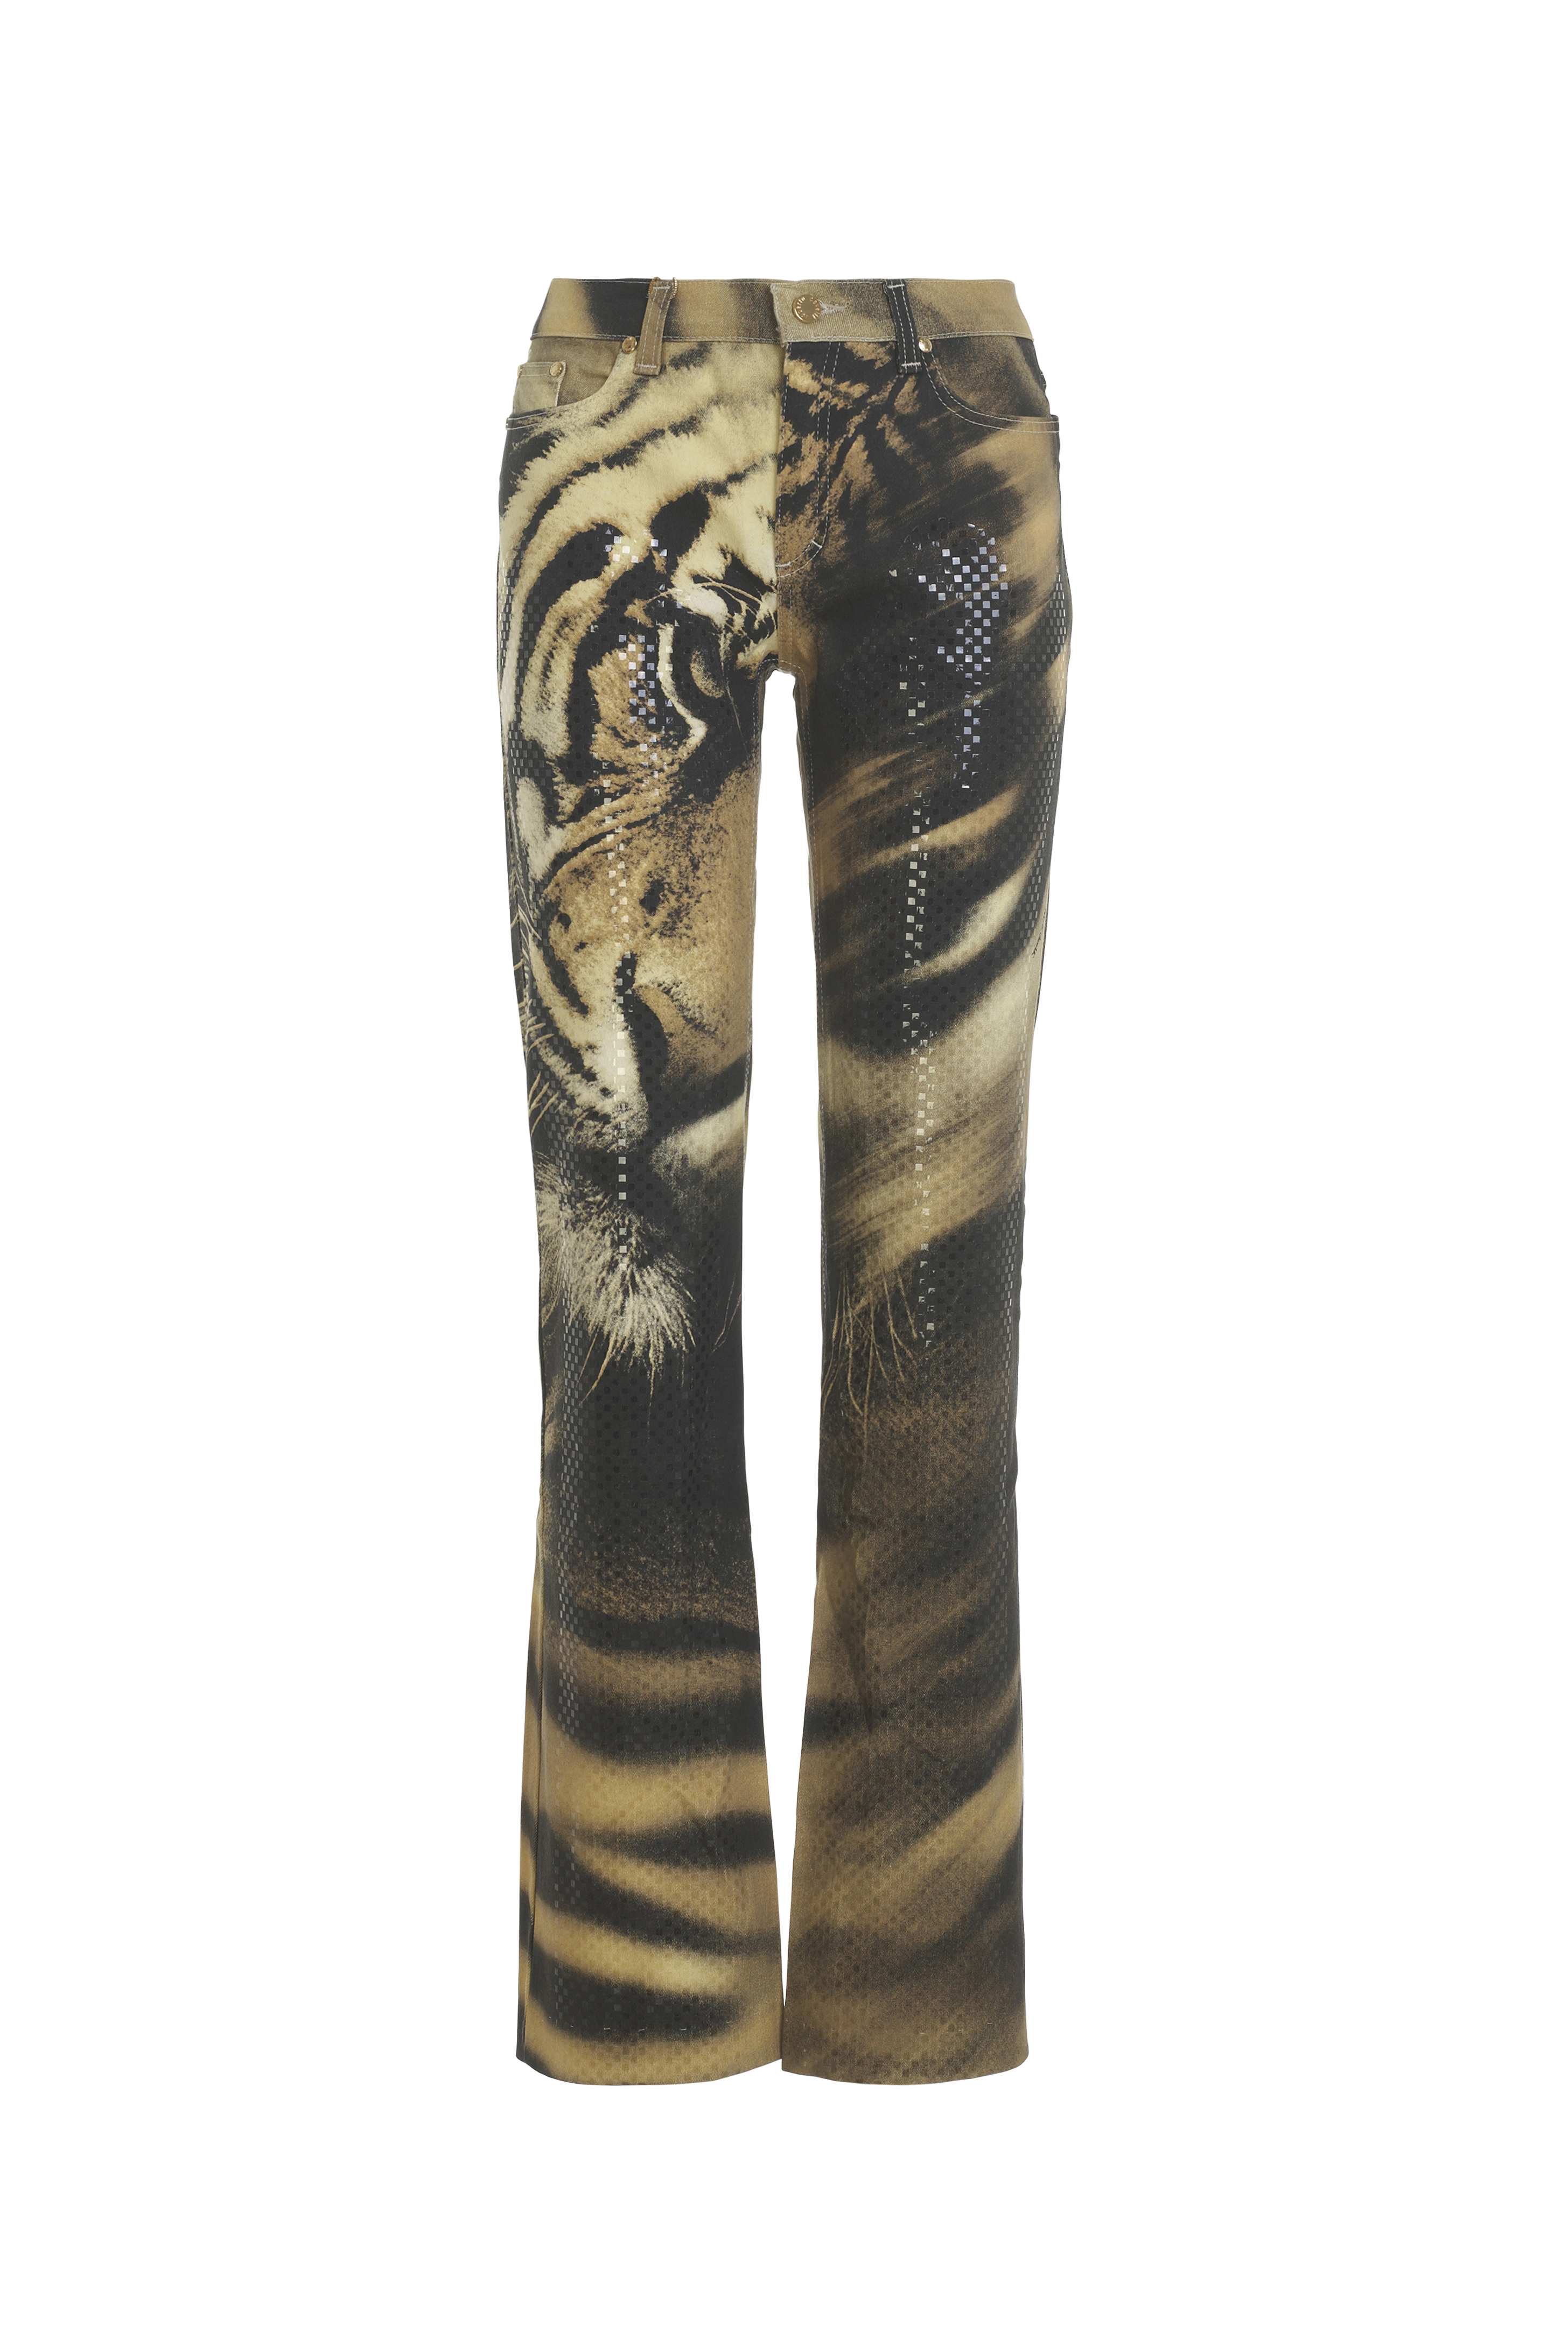 Roberto Cavalli tiger print trousers with sequin-like applique | Curate8